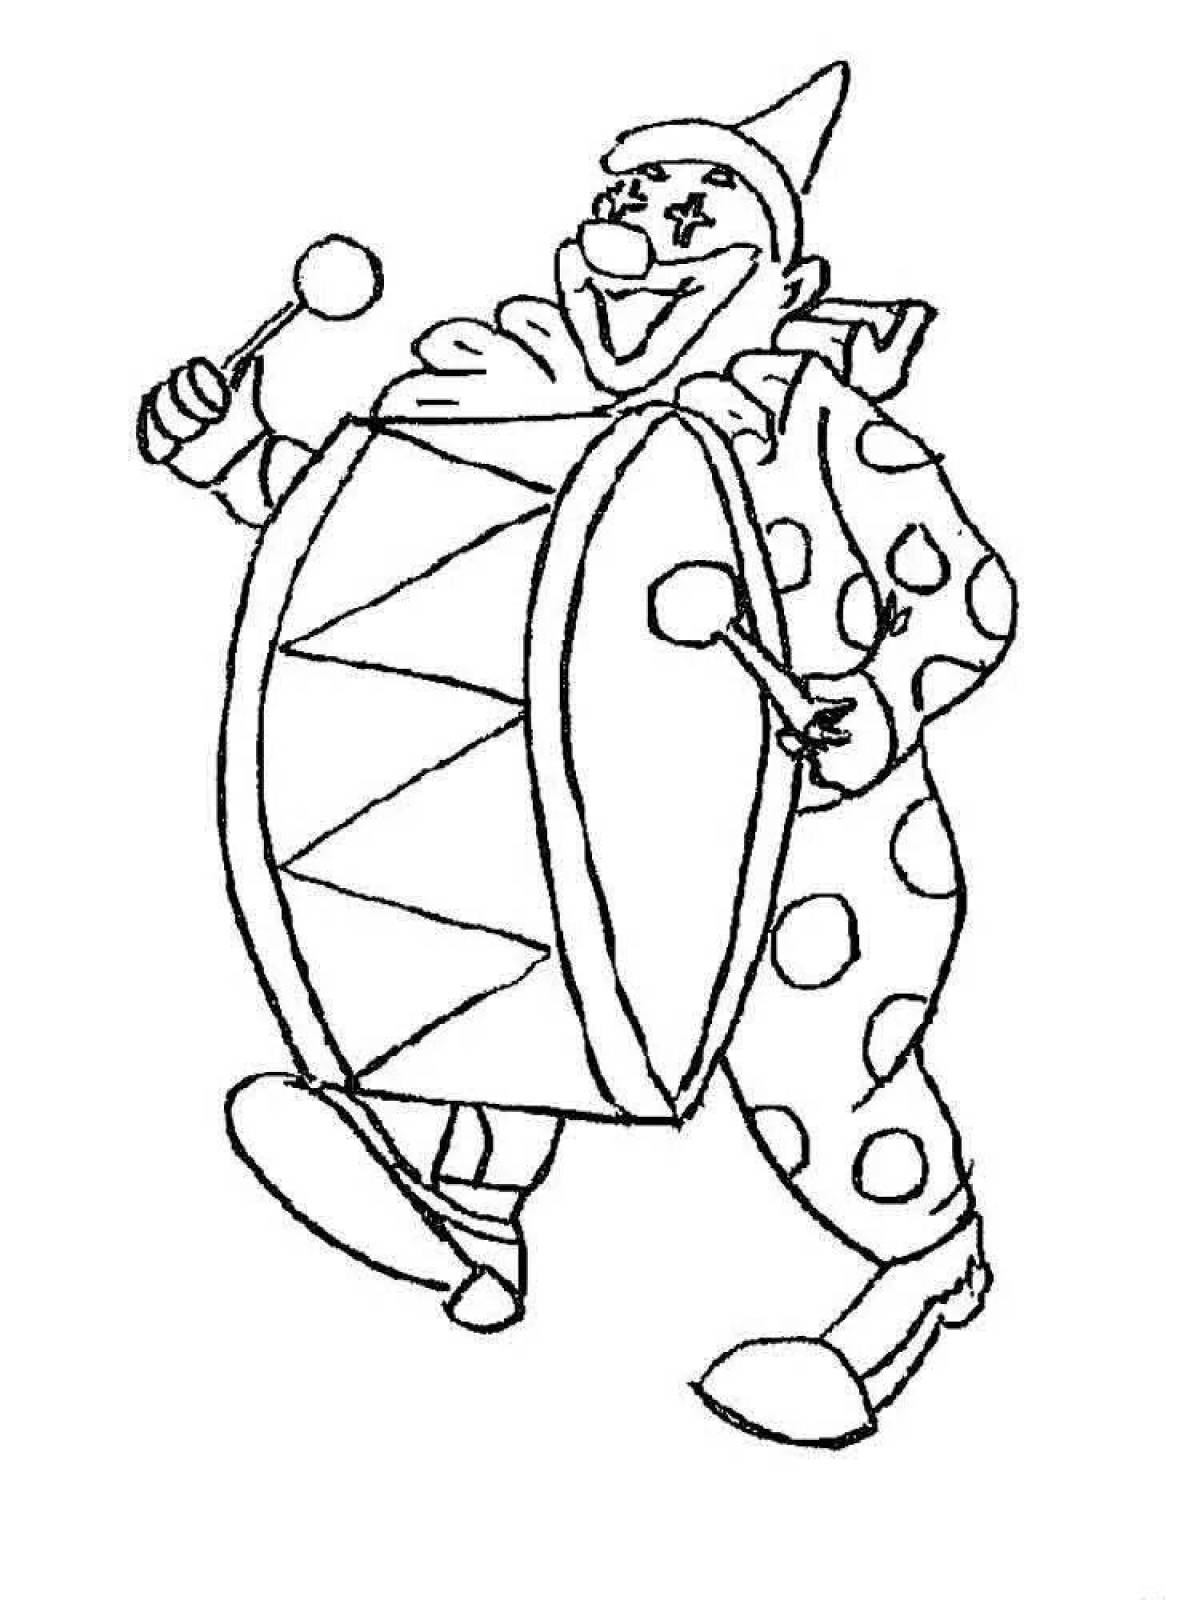 Animated jester coloring page